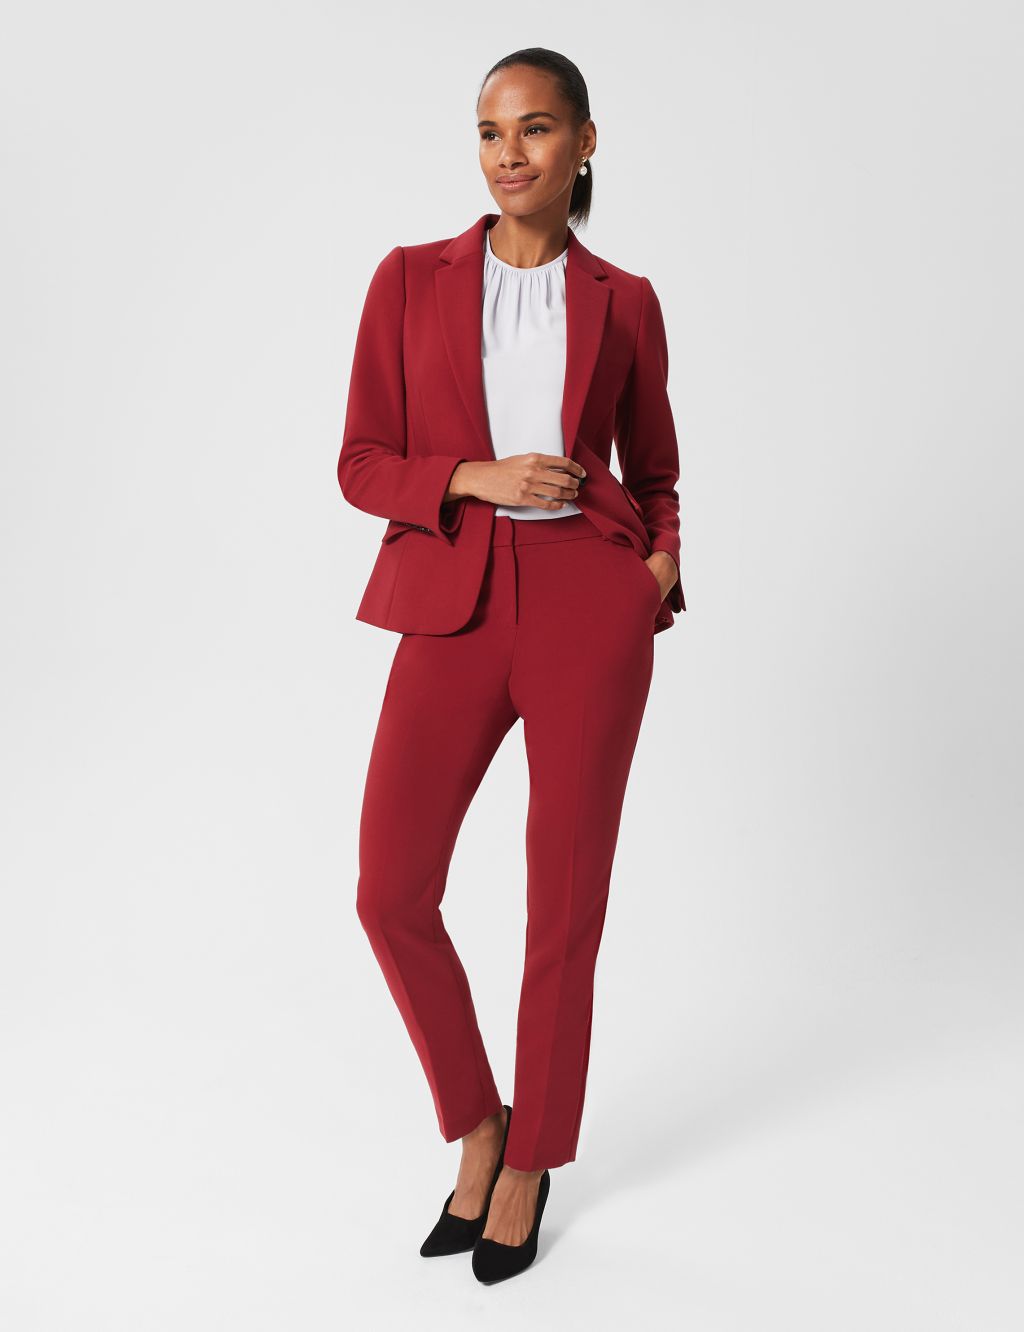 Women's Red Trousers | M&S